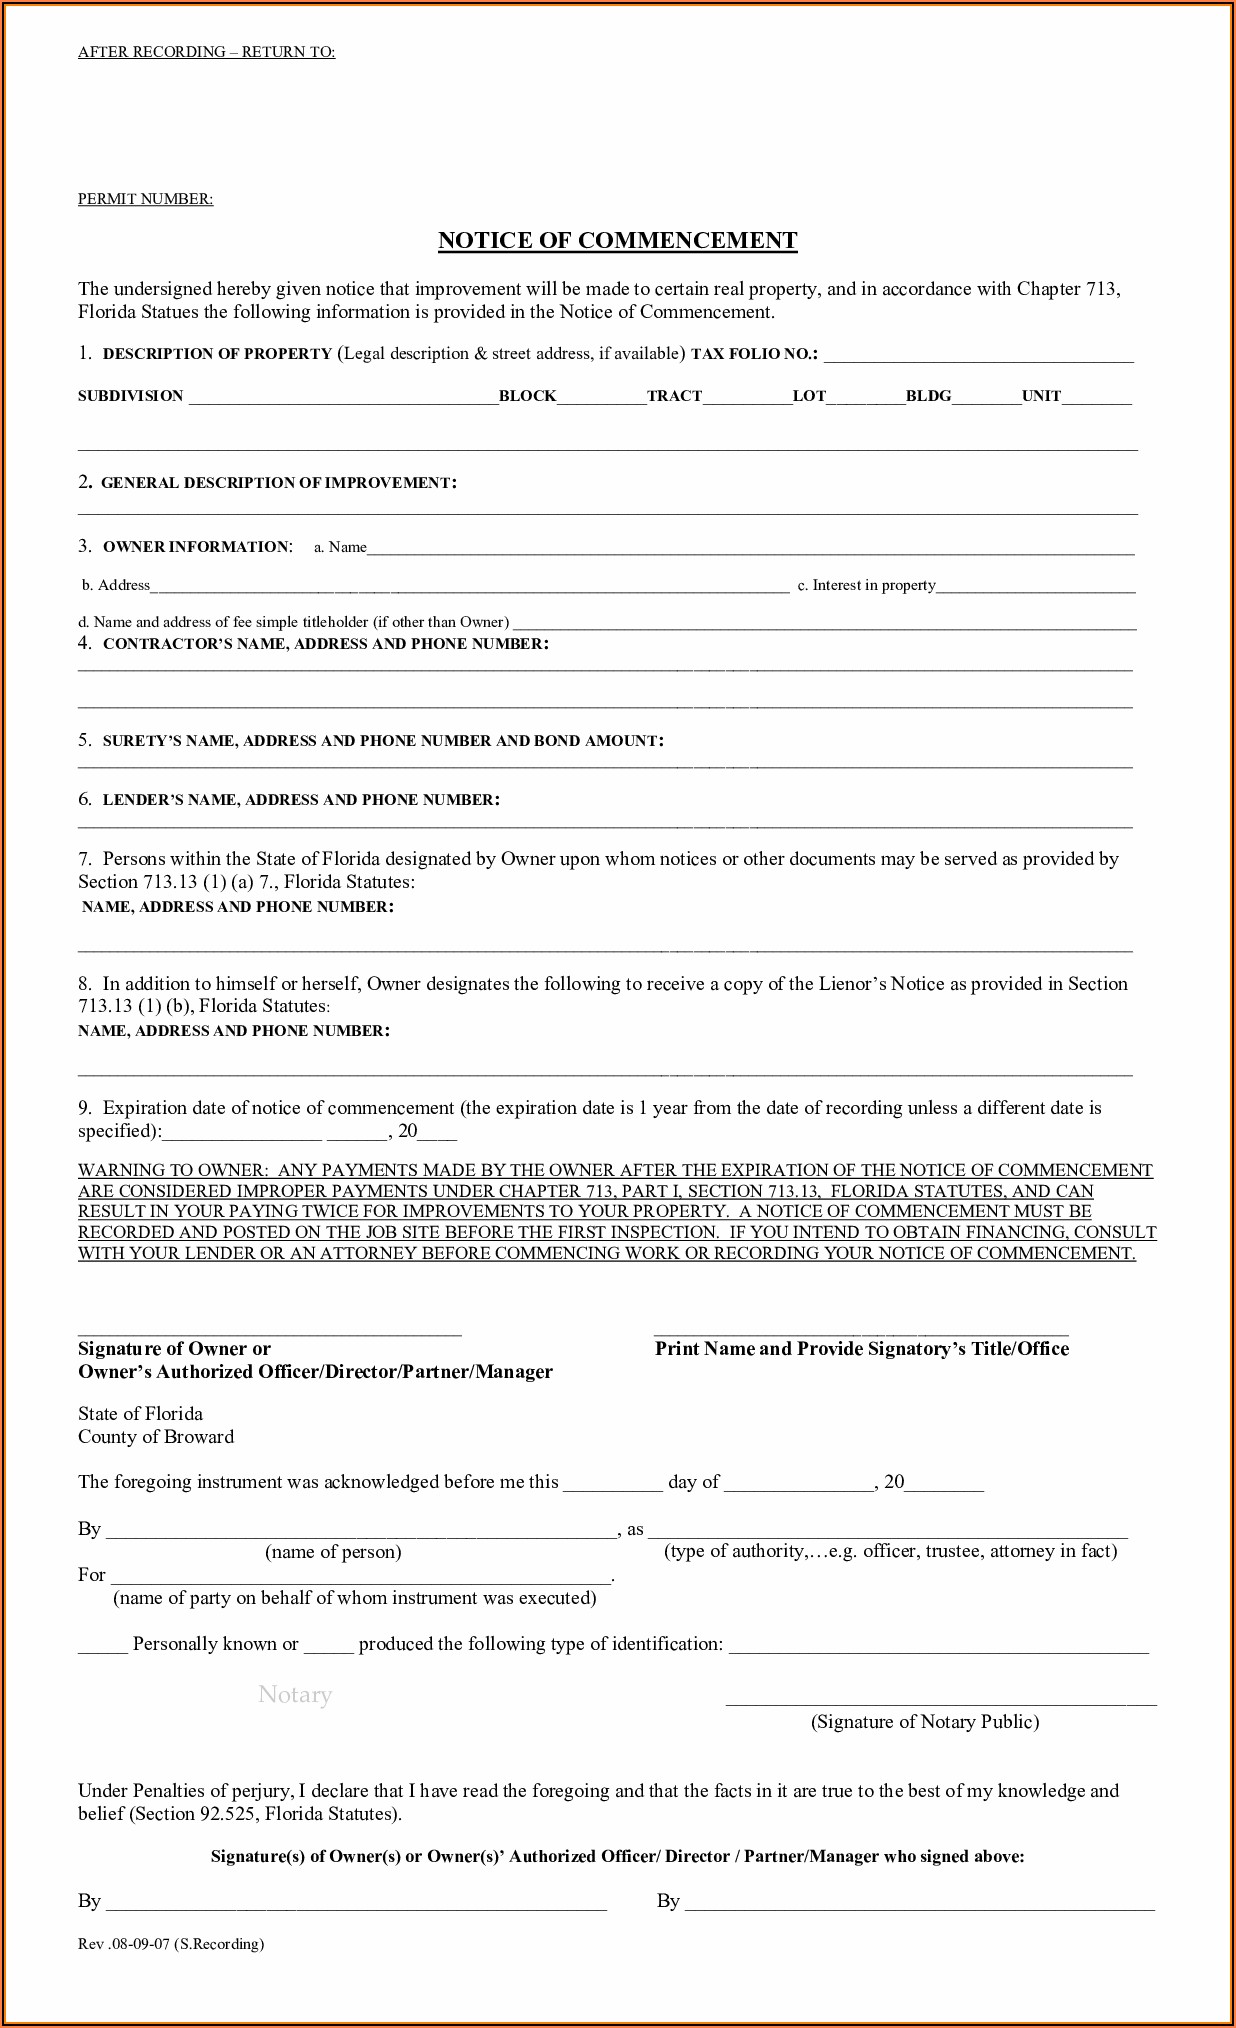 small-claims-forms-for-broward-county-florida-form-resume-examples